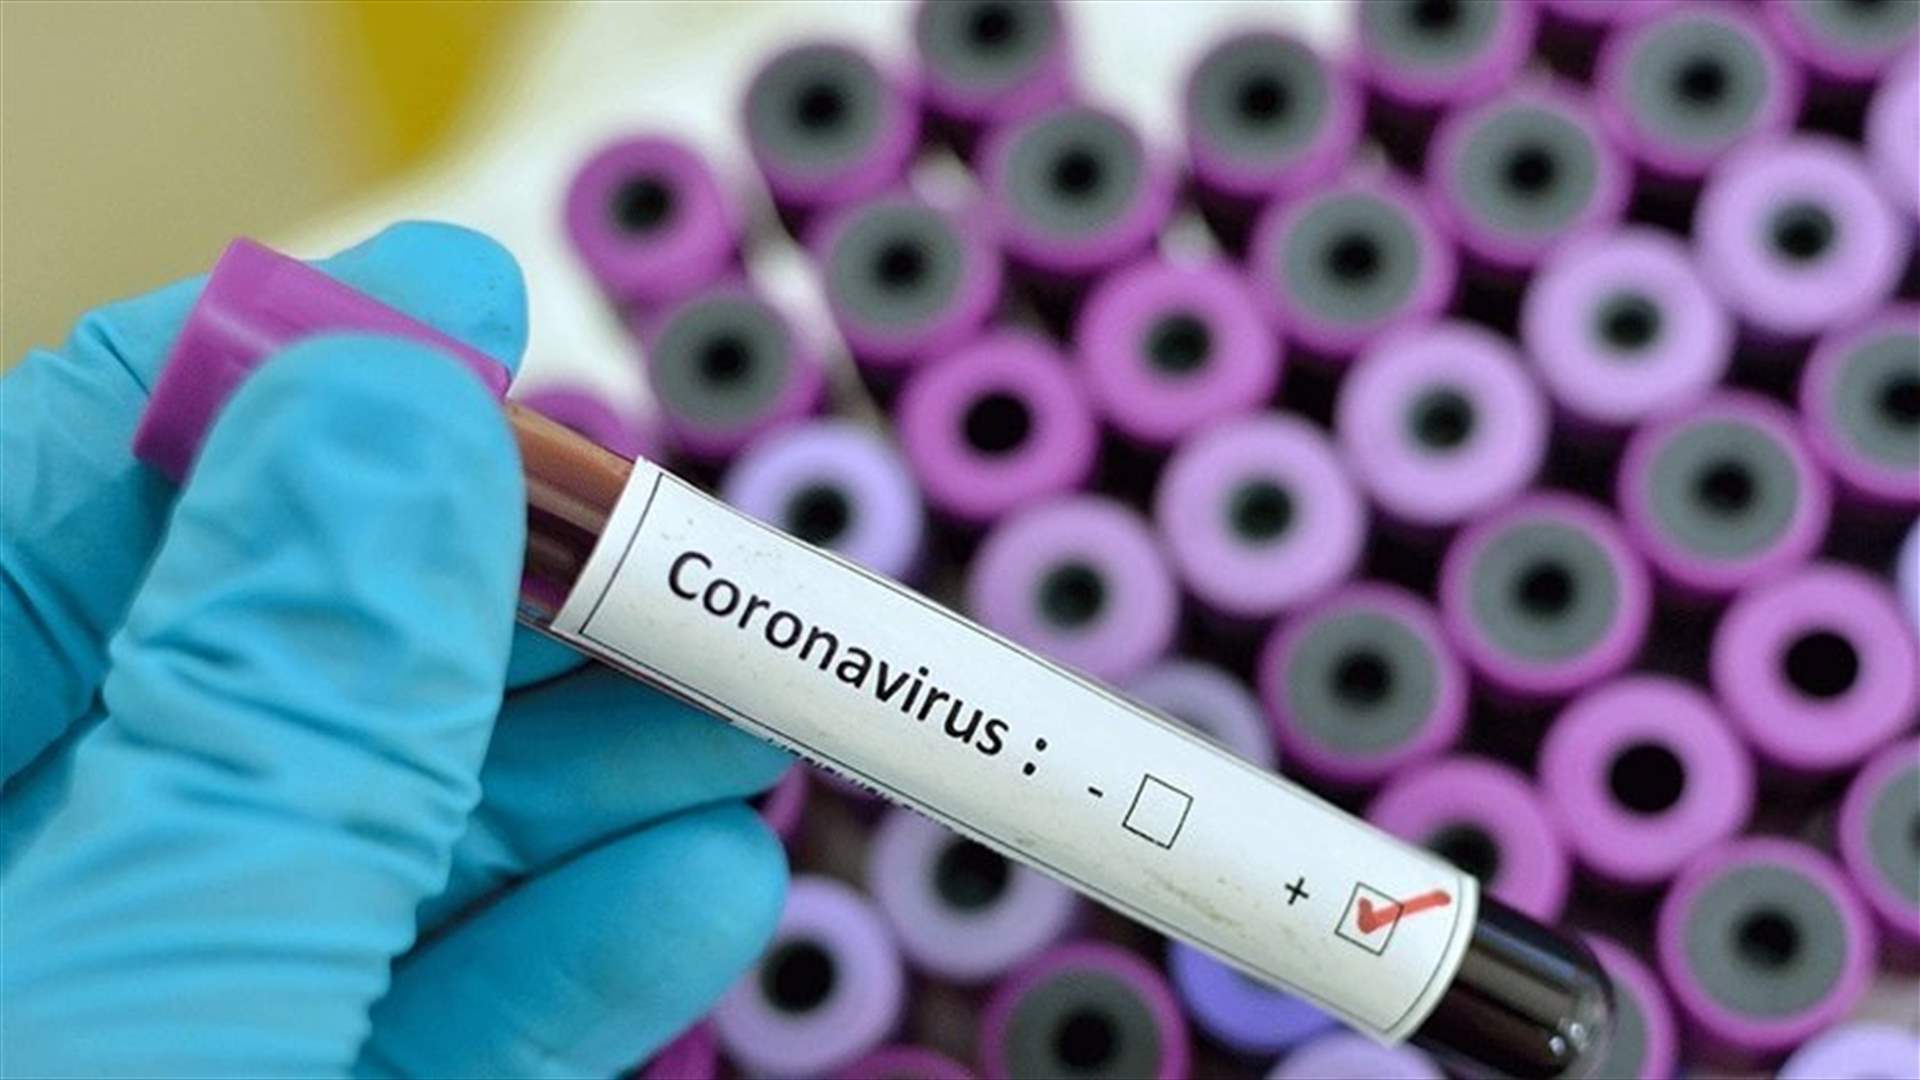 Belgian prince tests positive for coronavirus after attending gathering in Spain